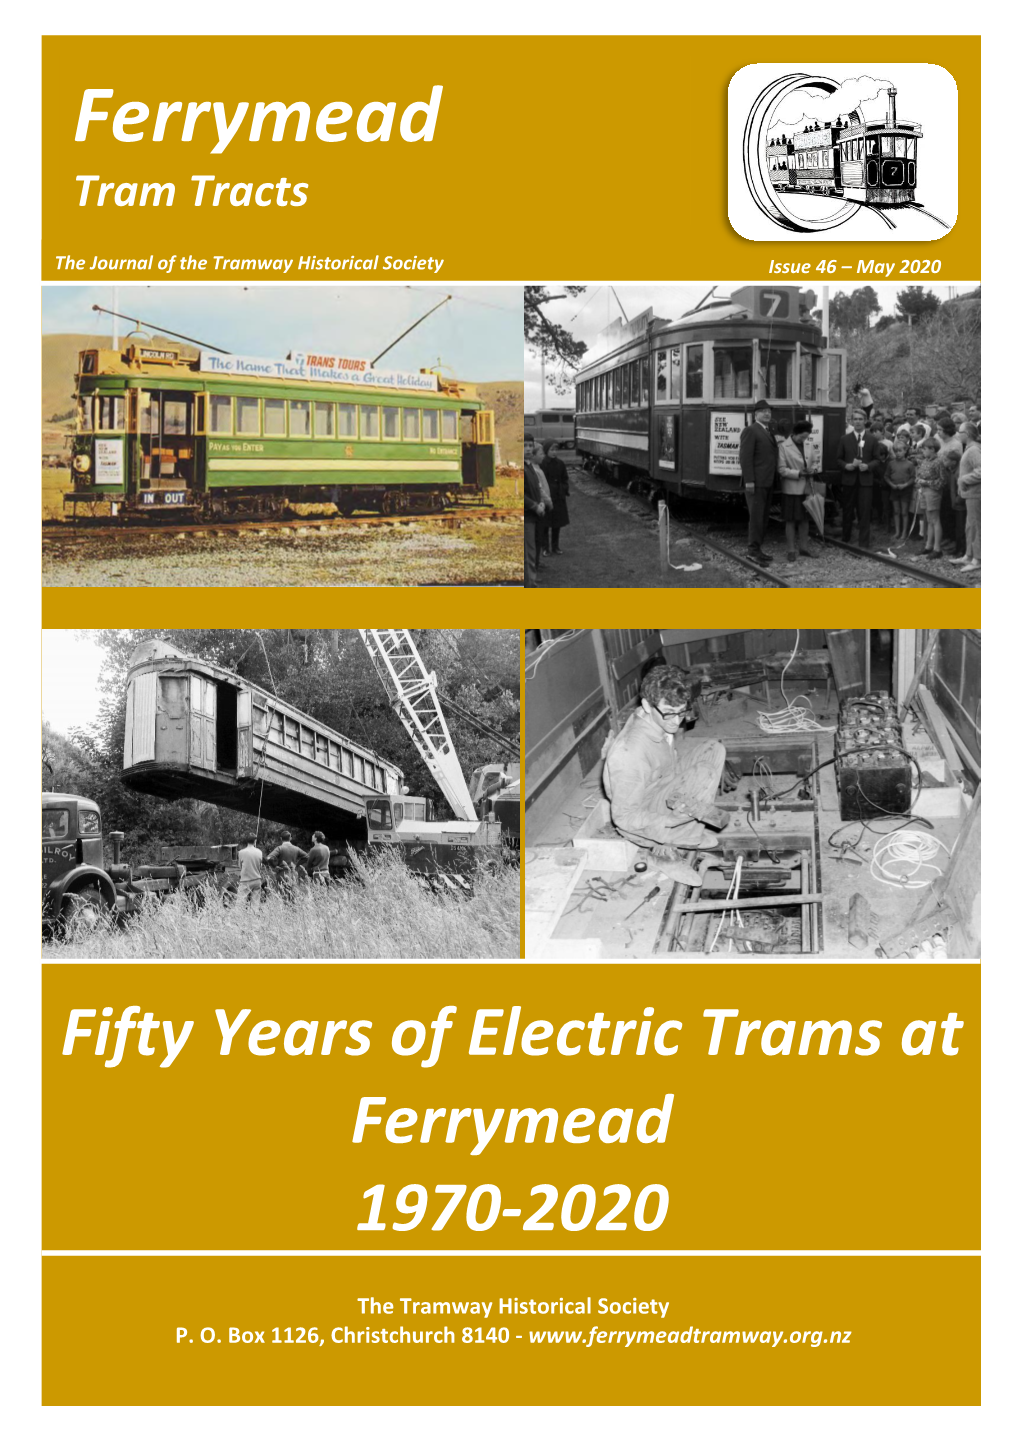 Ferrymead Tram Tracts